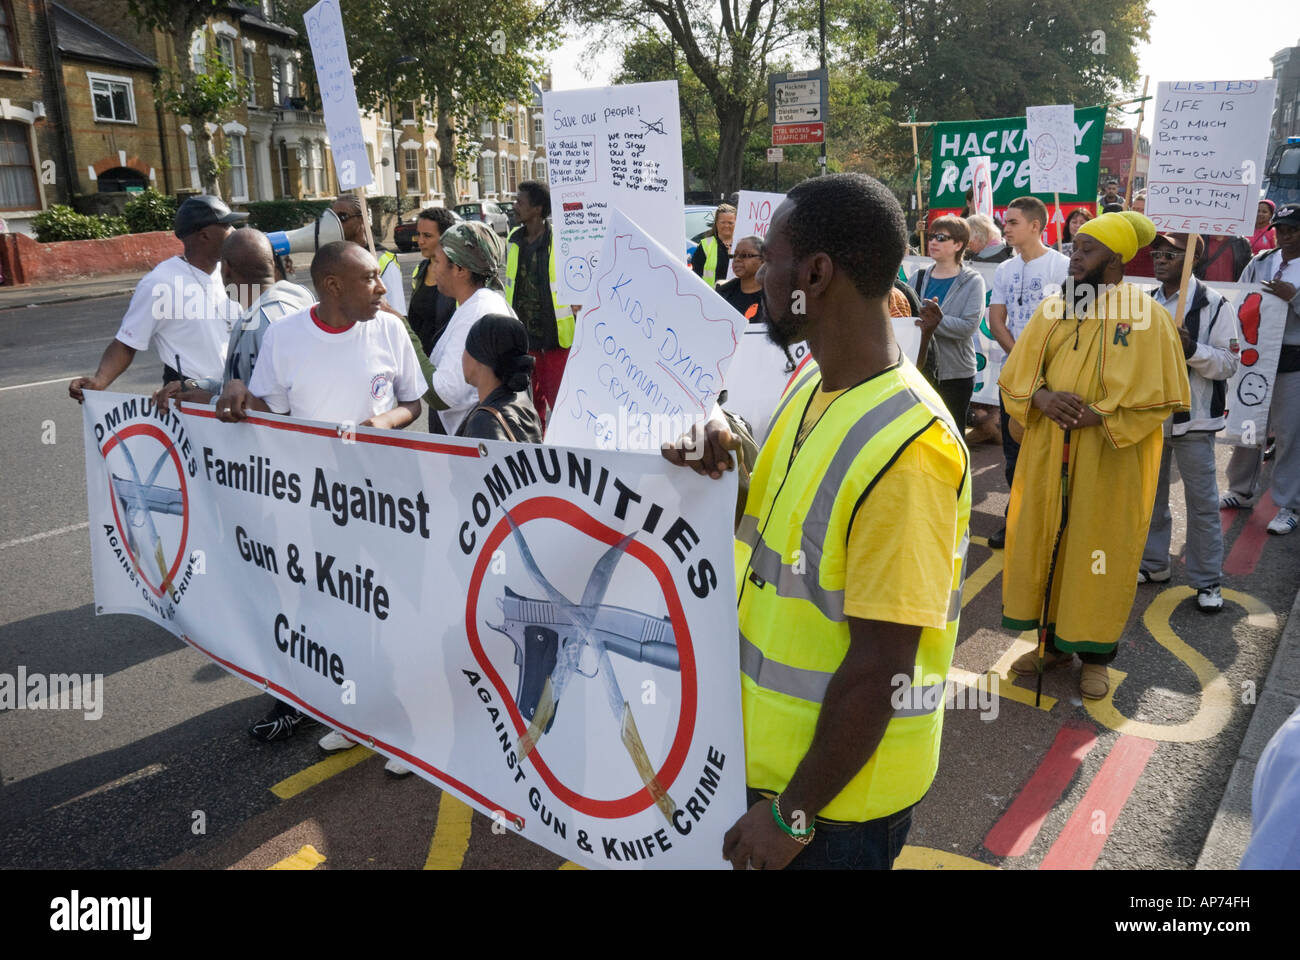 Community March Against Gun And Knife Crime In Hackney London Goes Along A Street Notorious For Several Murders Stock Photo Alamy